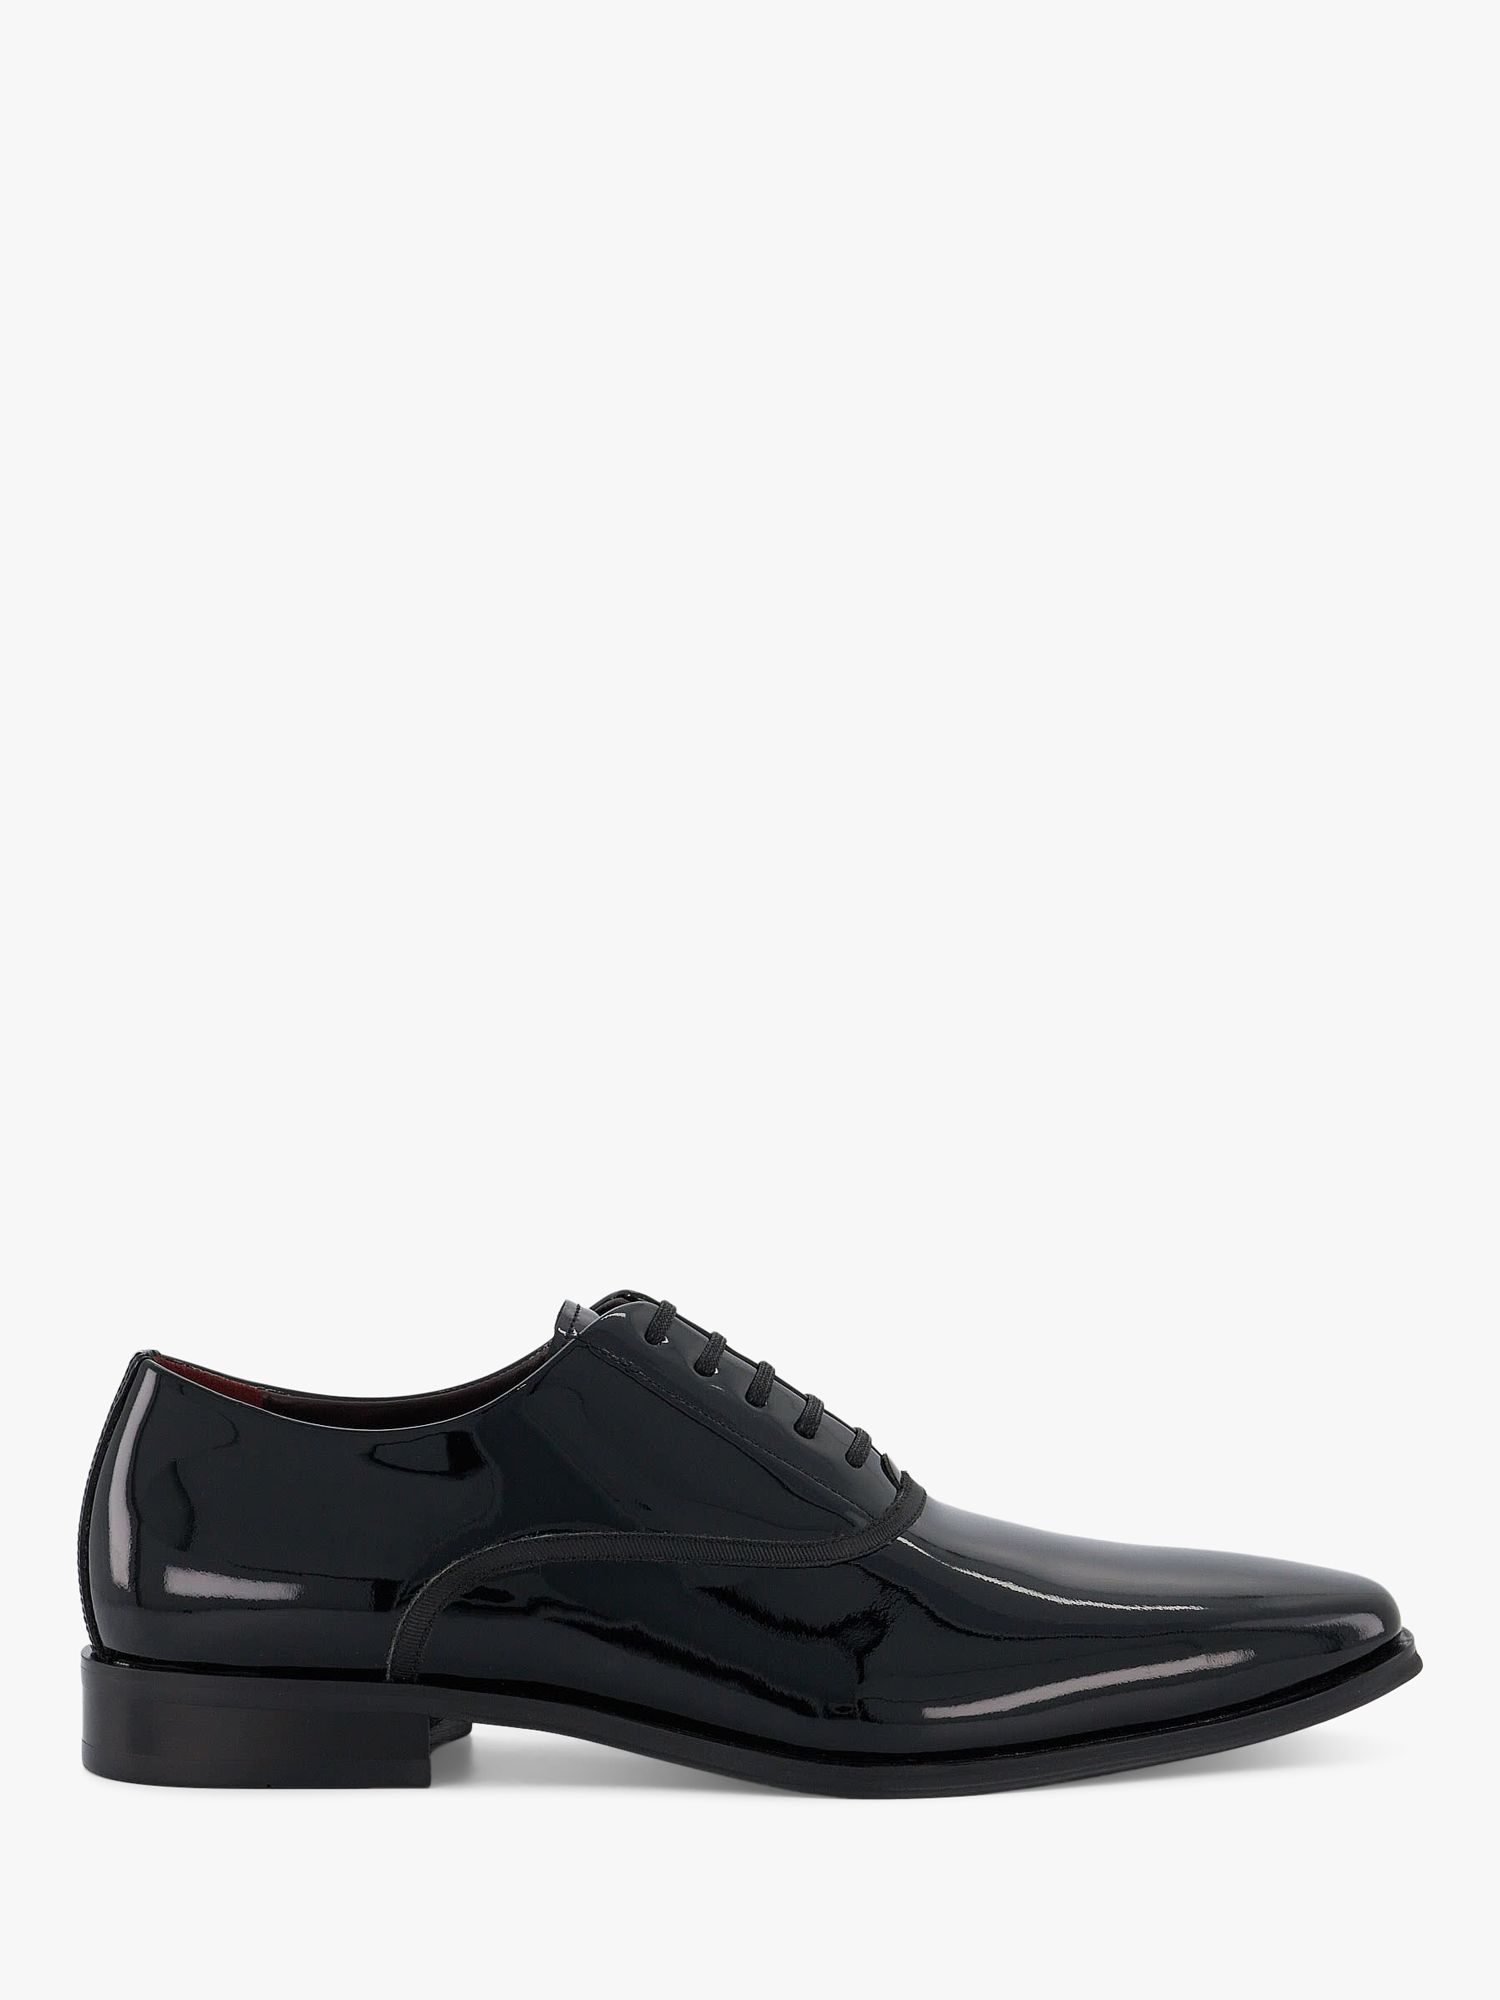 Dune Swallow Patent Leather Oxford Shoes, Black at John Lewis & Partners